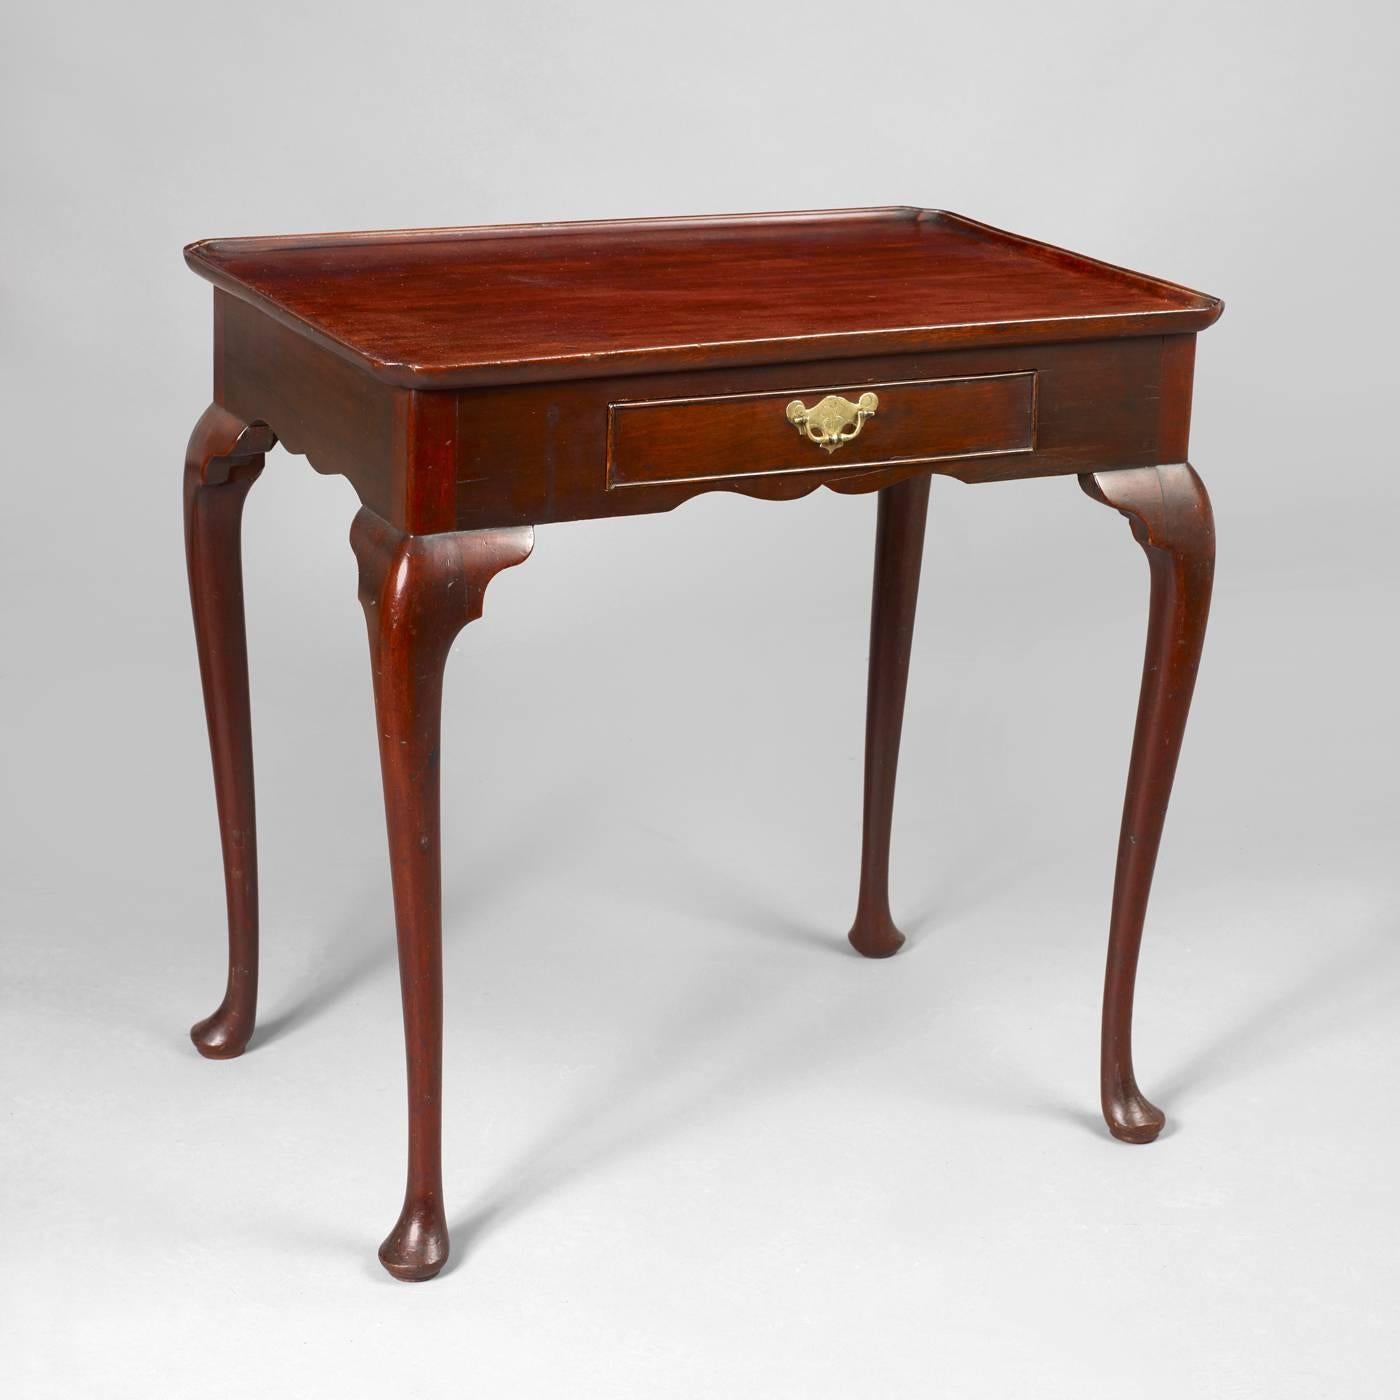 English, circa 1750.
Mahogany, oak and pine secondary woods
having a tray top with notched corners above a small drawer inset into a skirt with carved 